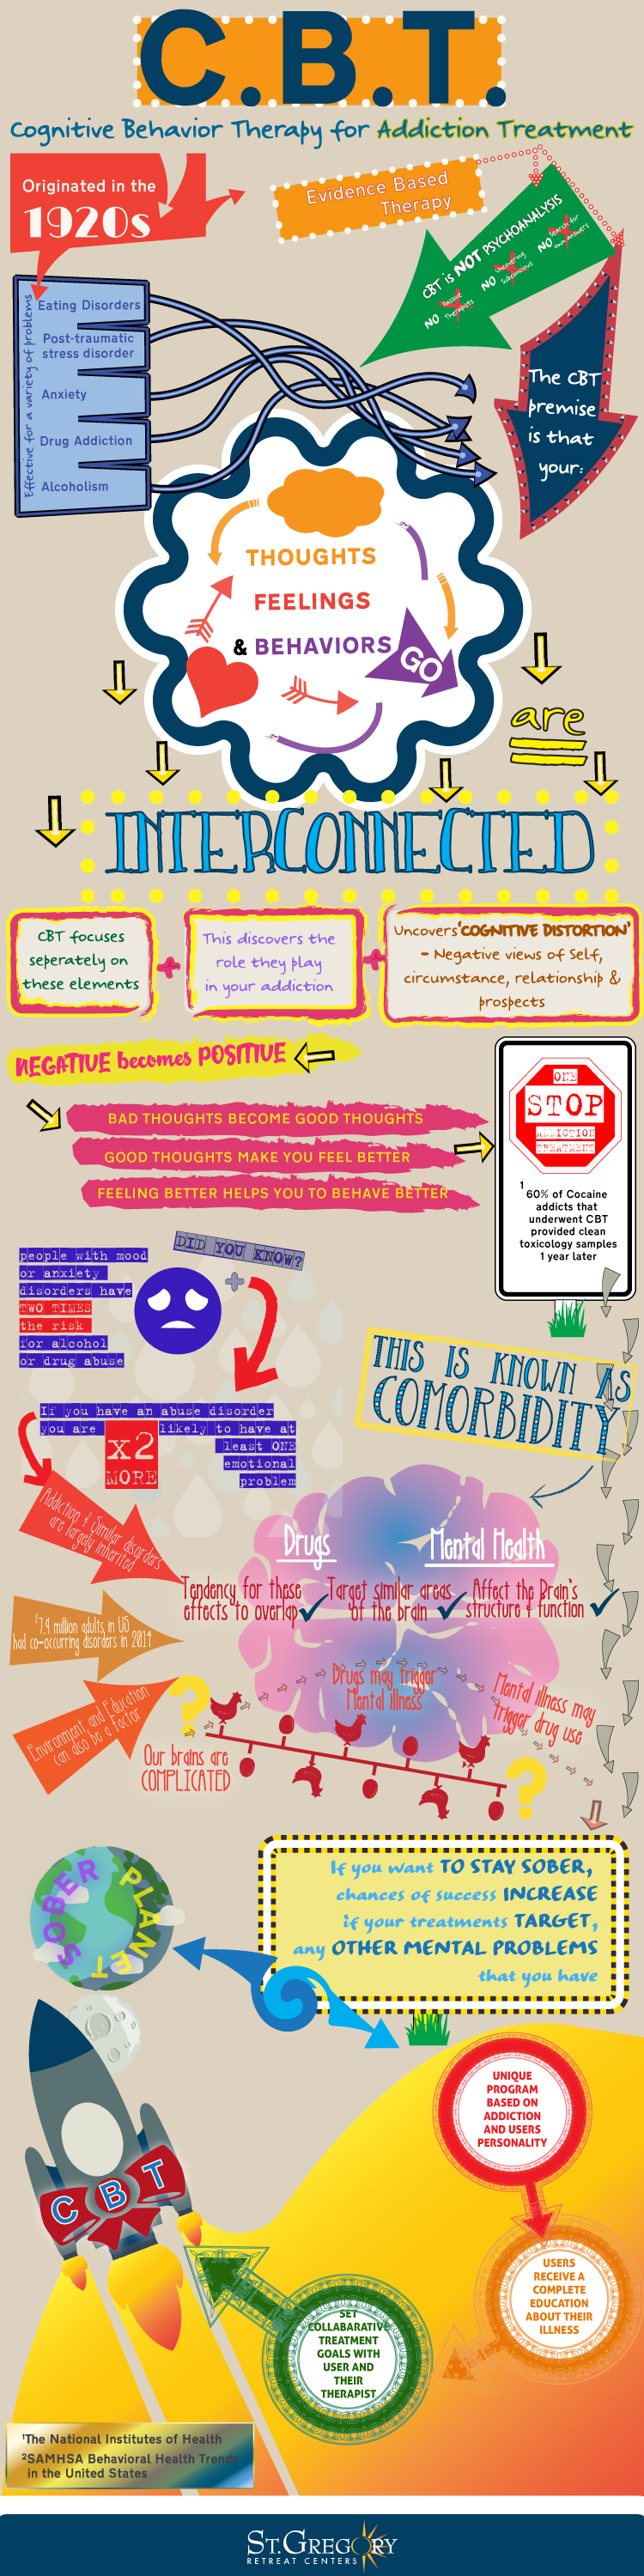 collage infographic about CBT